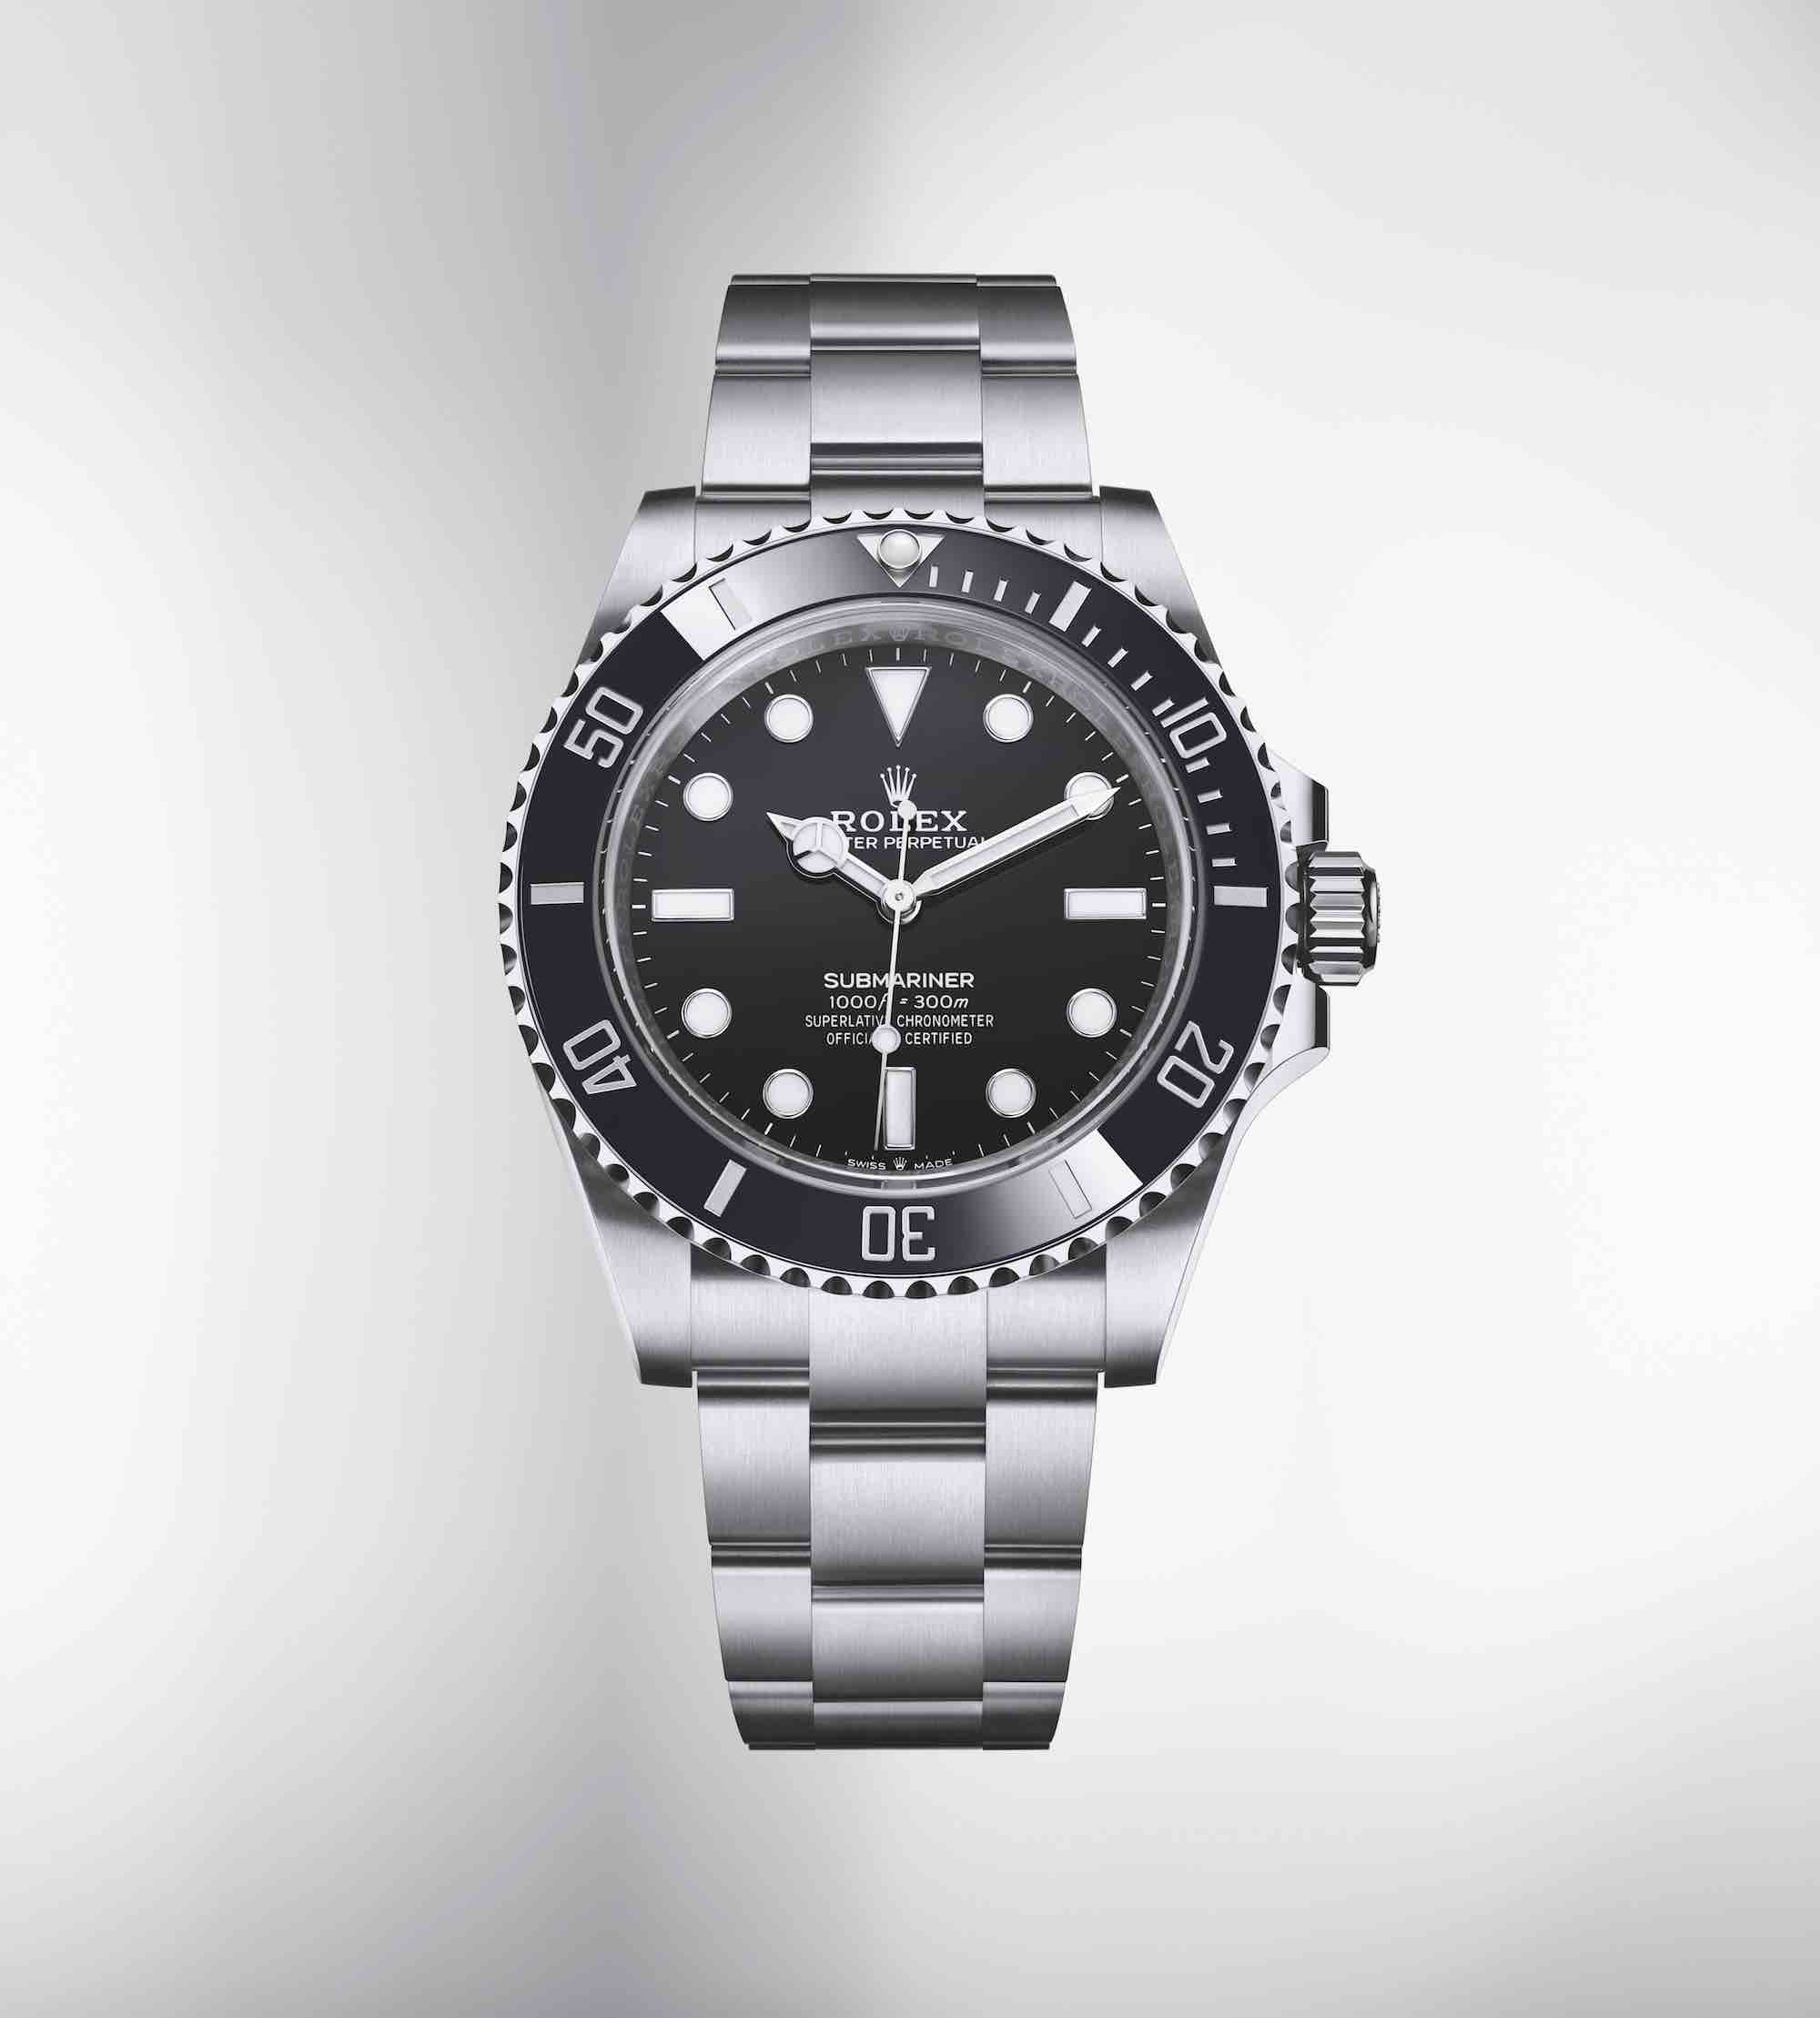 The fully redesigned Rolex Submariner Collection